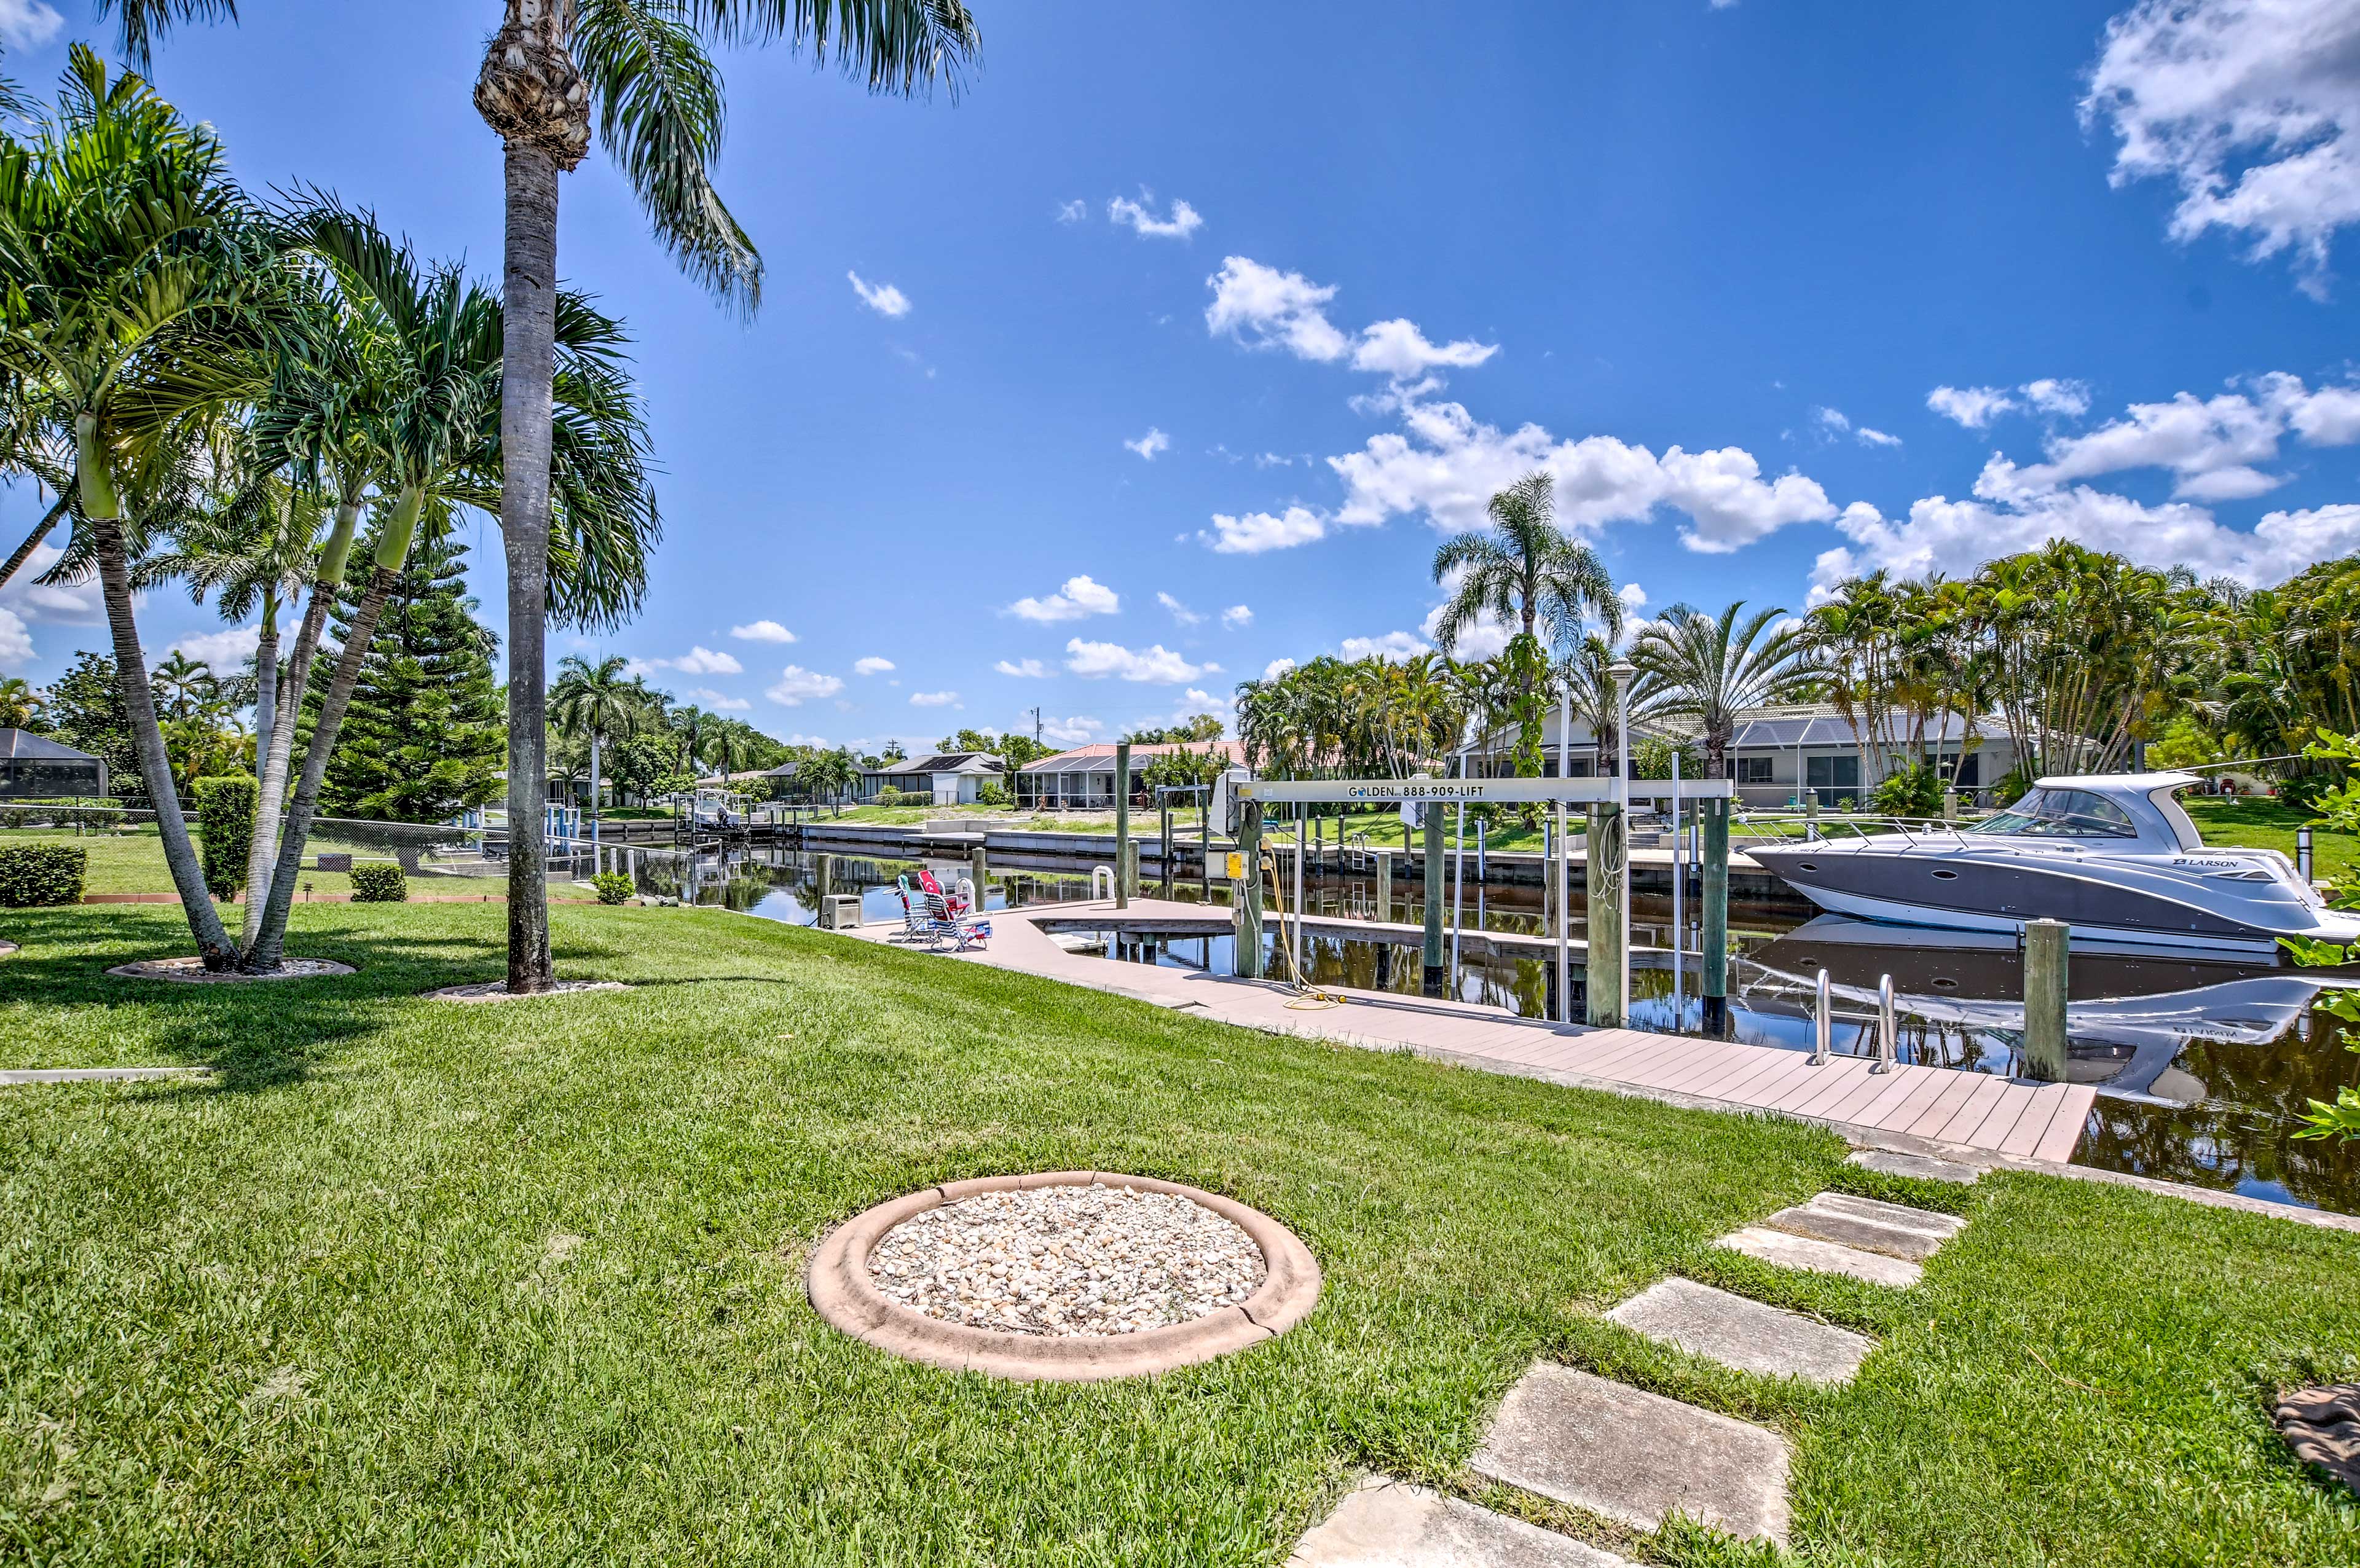 Relish in the waterfront and palm tree views.